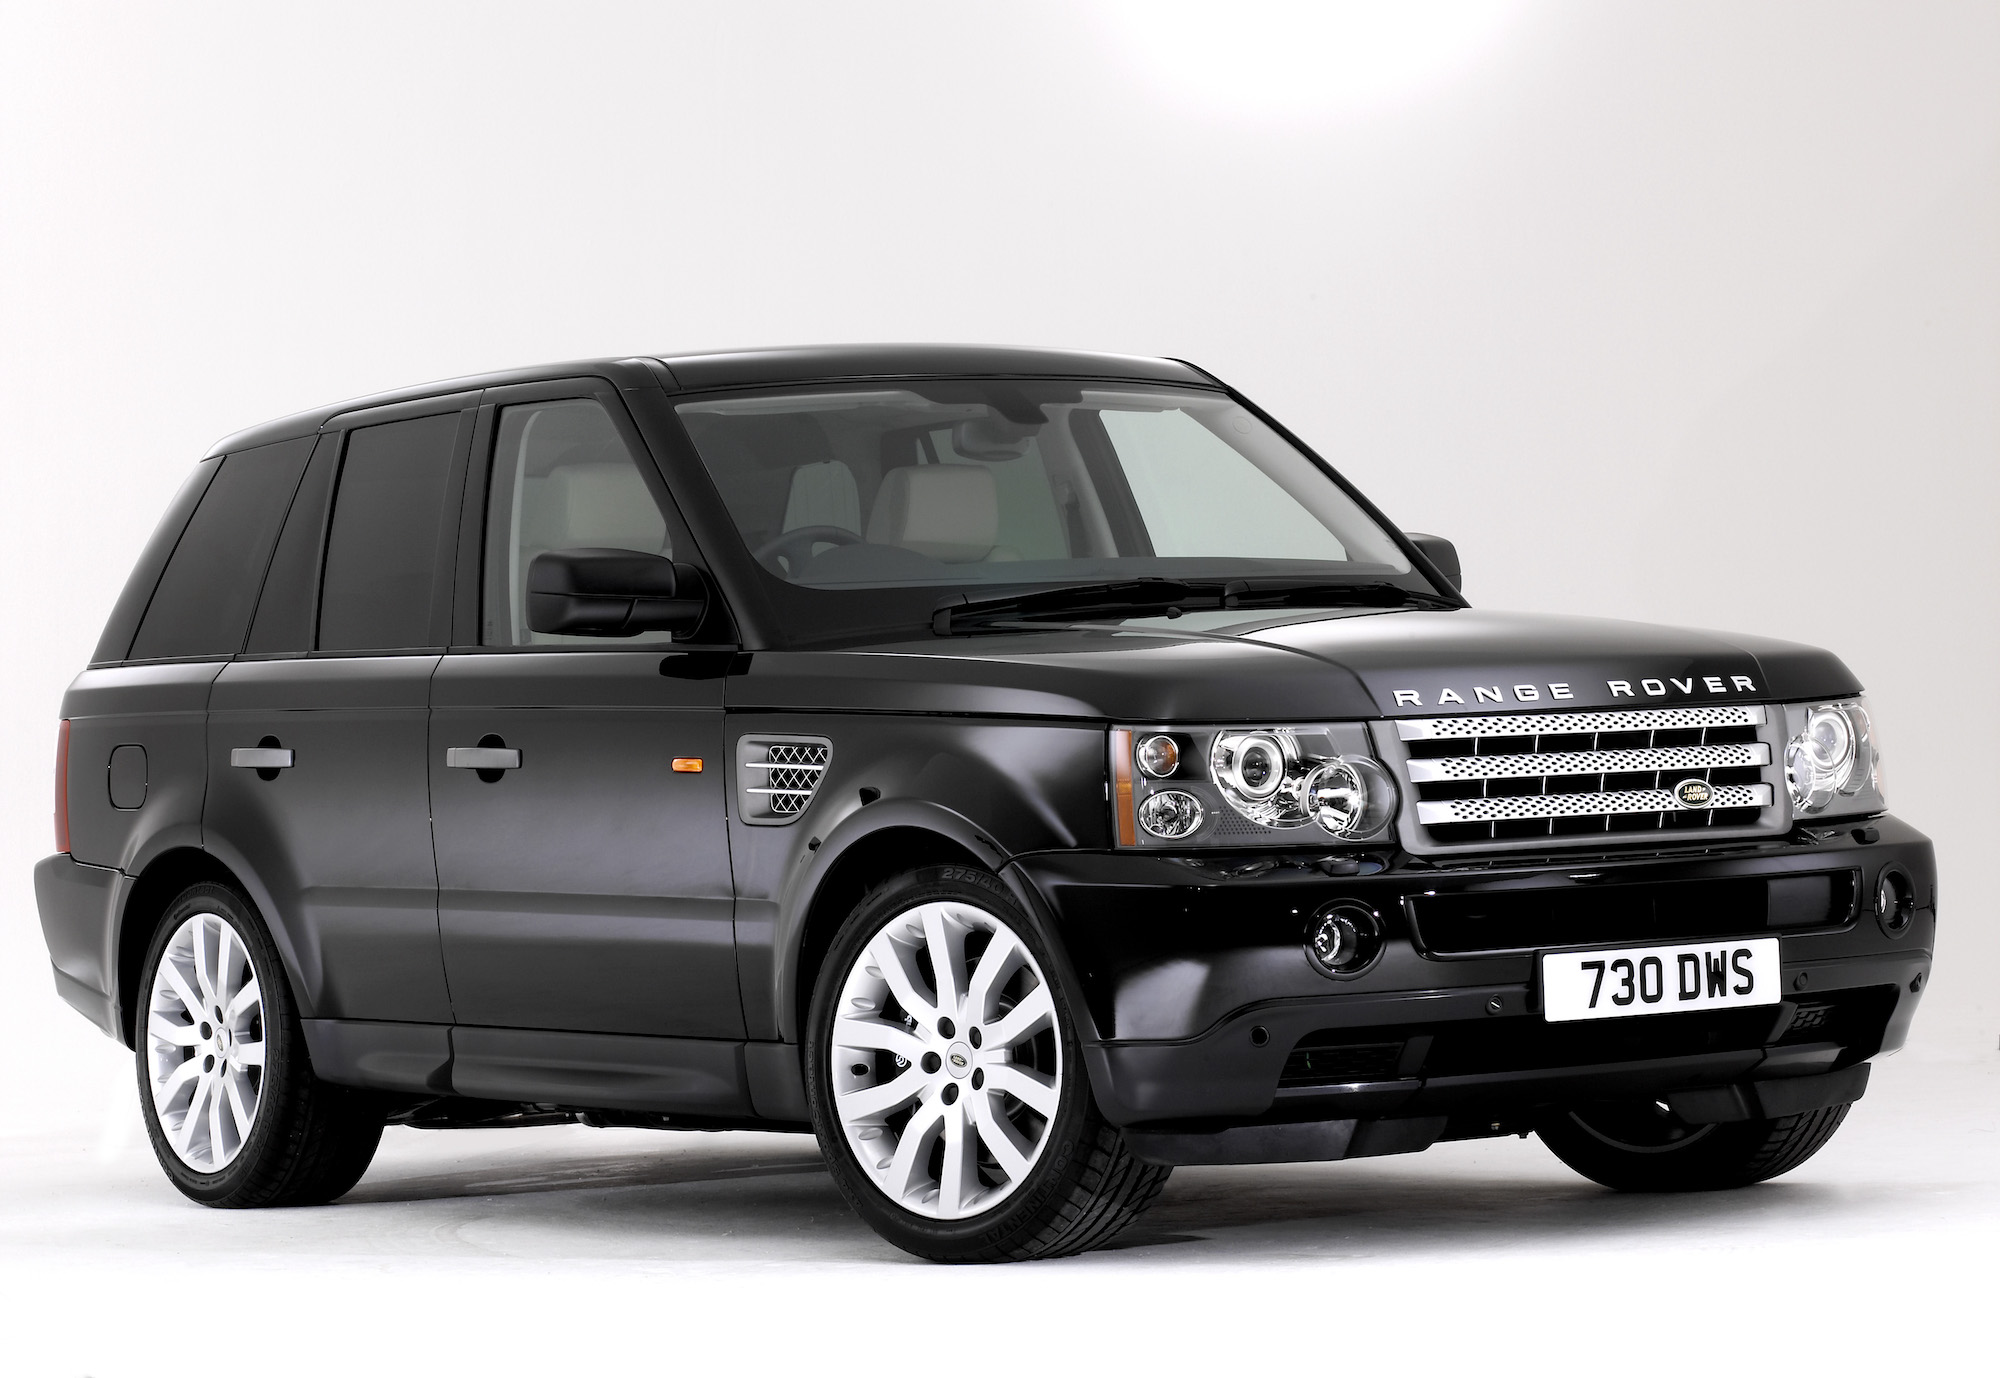 A parked black 2004 Range Rover Sport with tinted windows